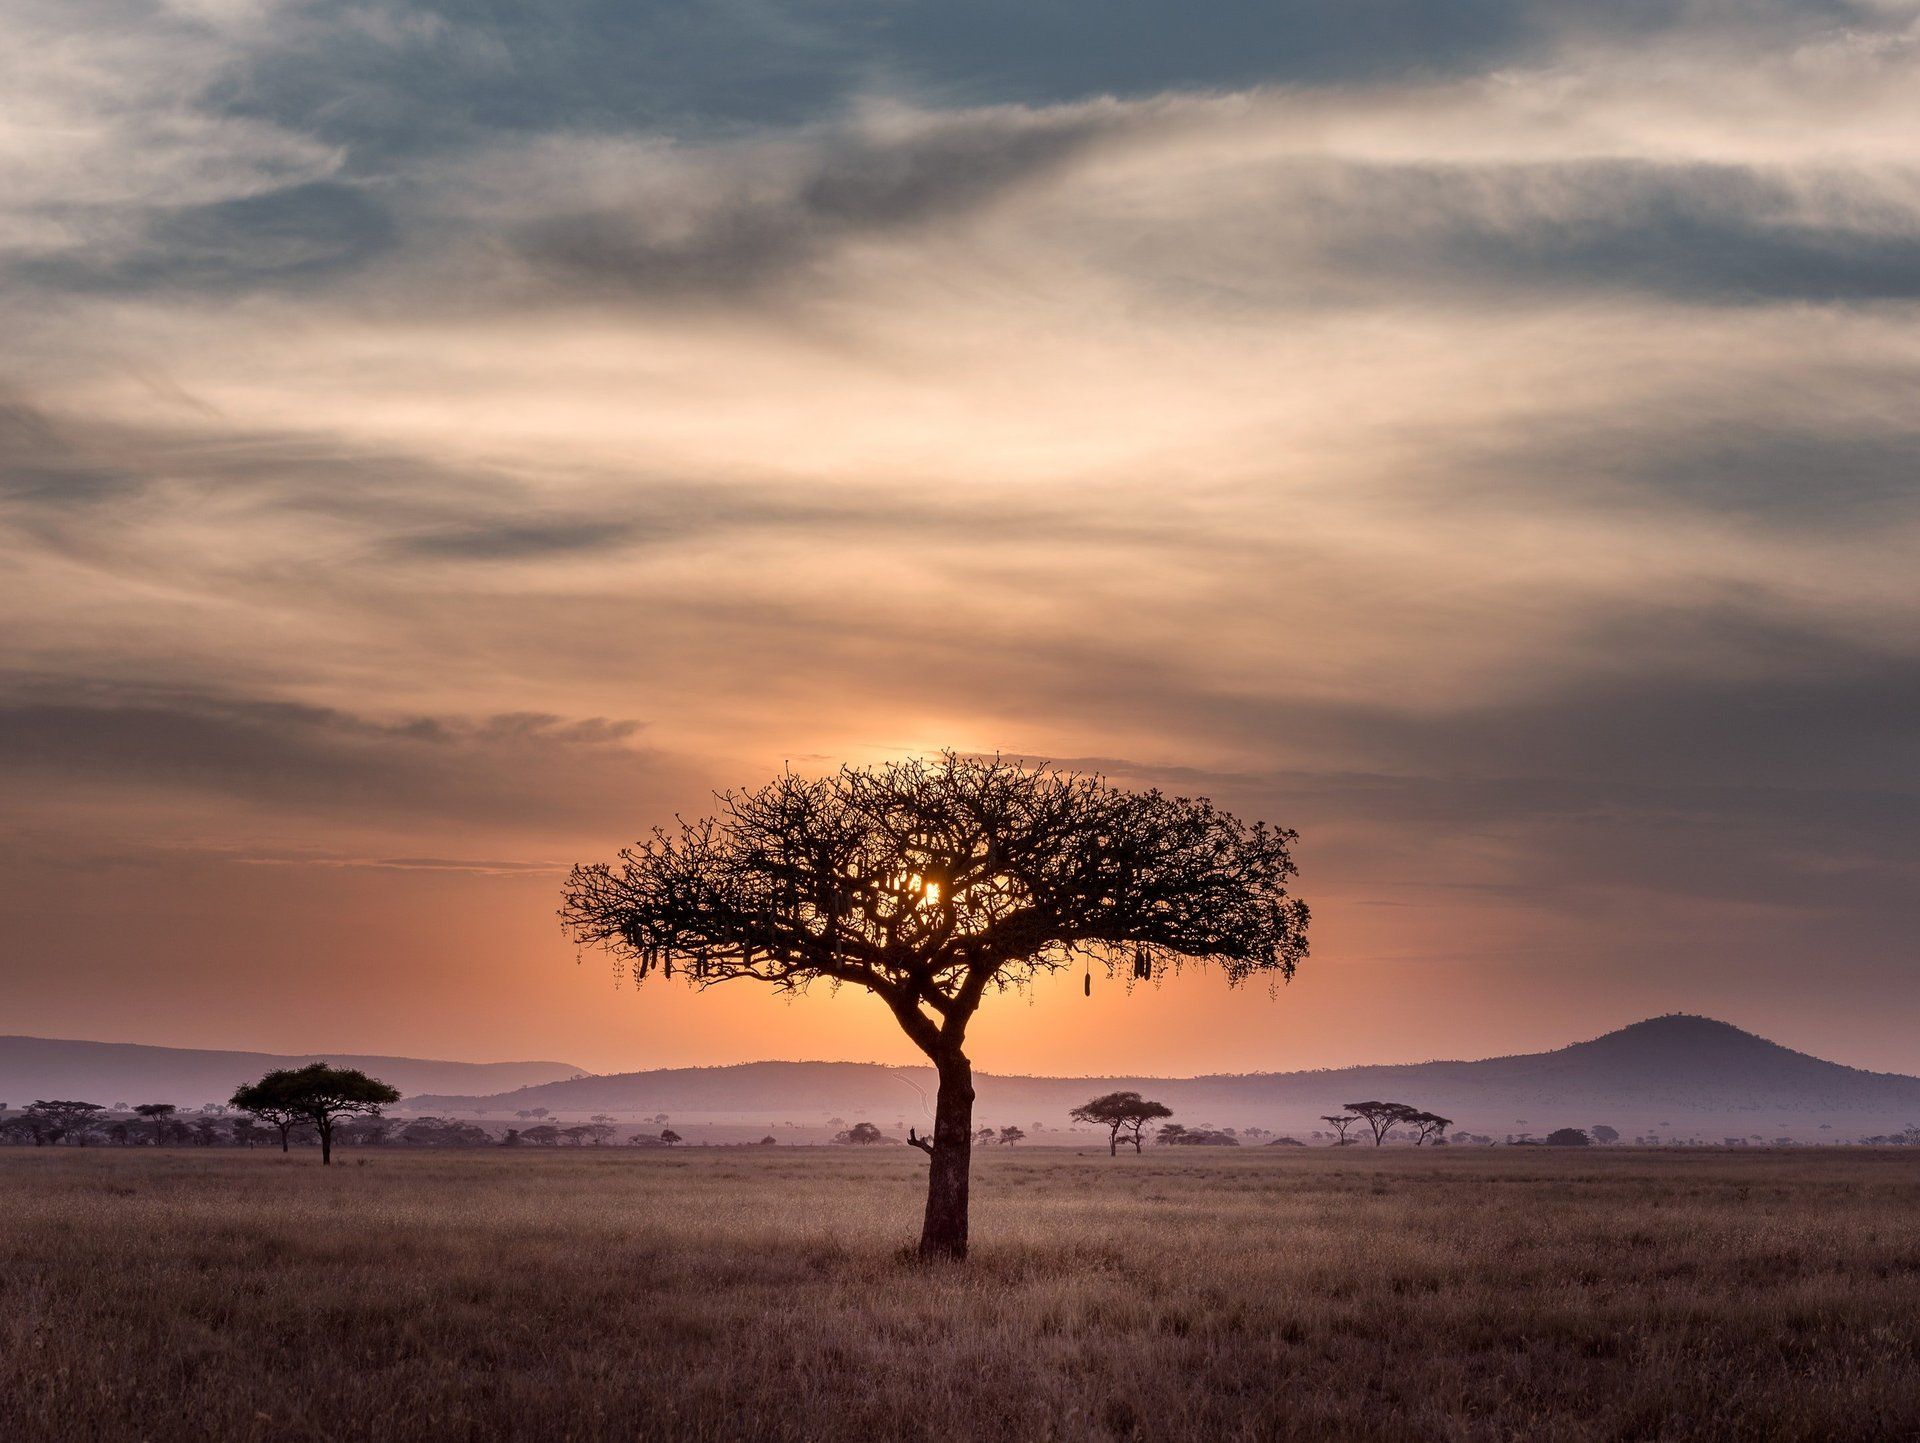 African landscape with solitary tree in front of beautiful cloudy skyline during sunset